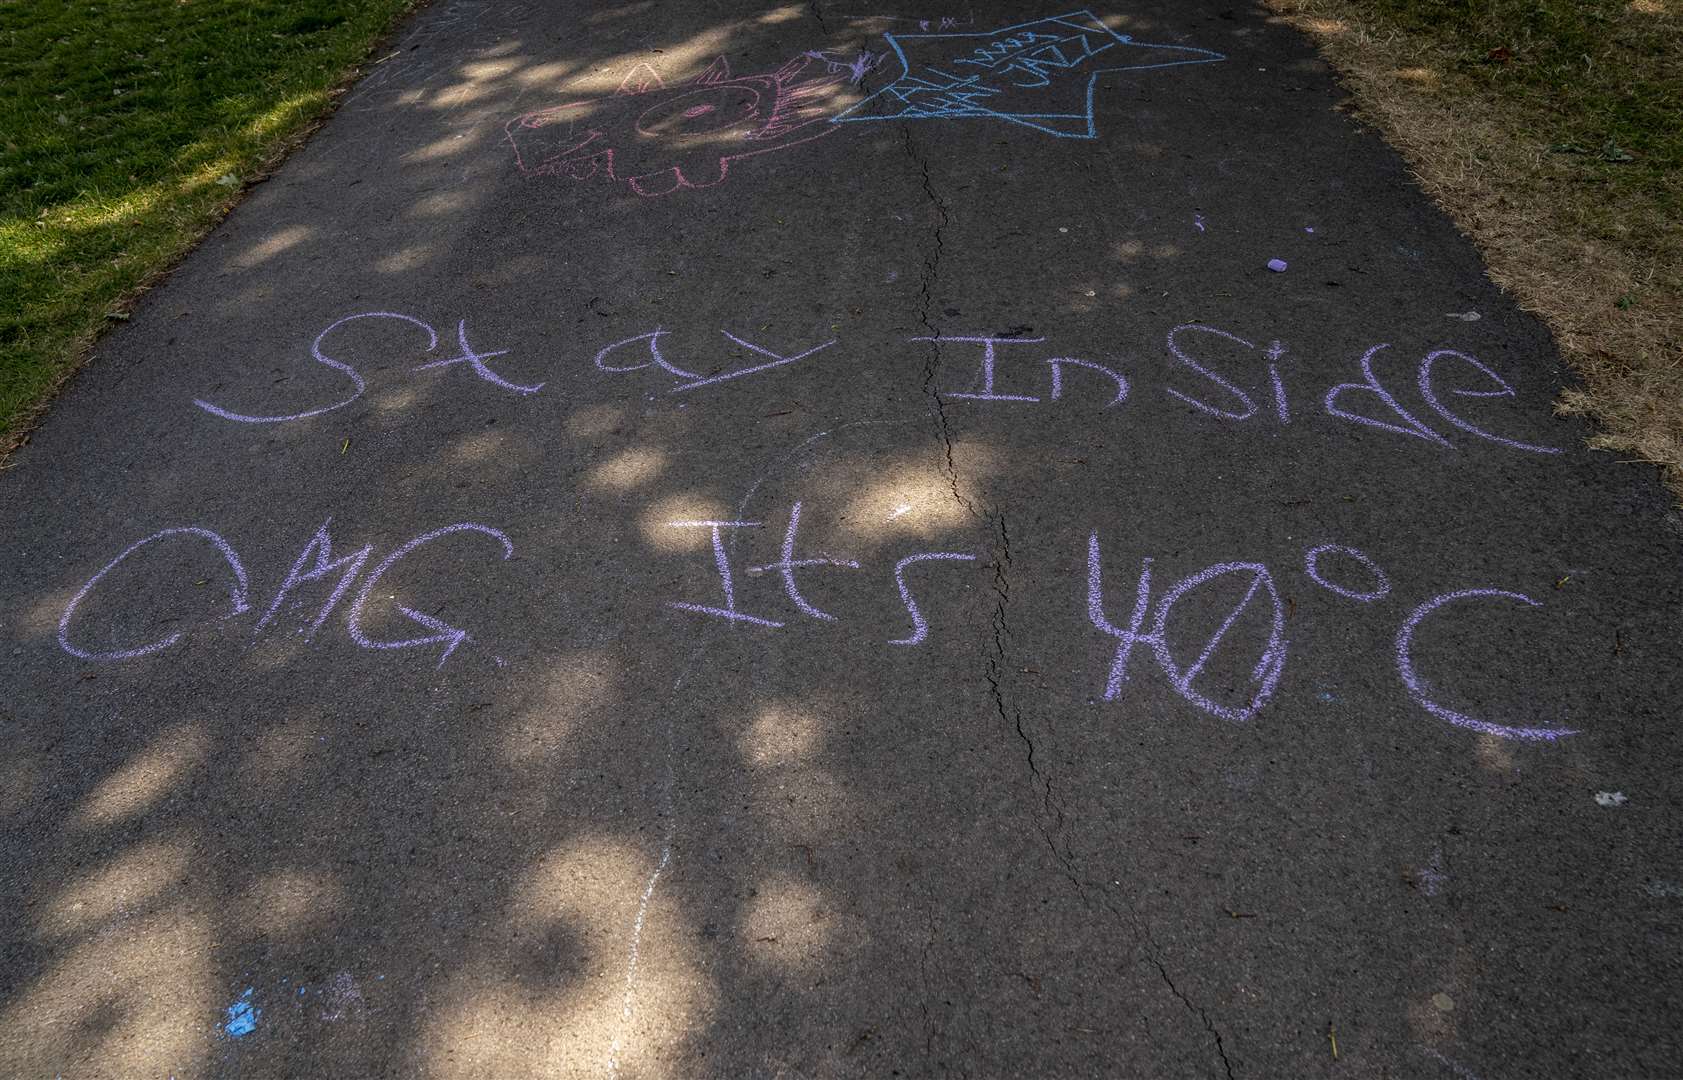 Writing on the ground (Danny Lawson/PA)